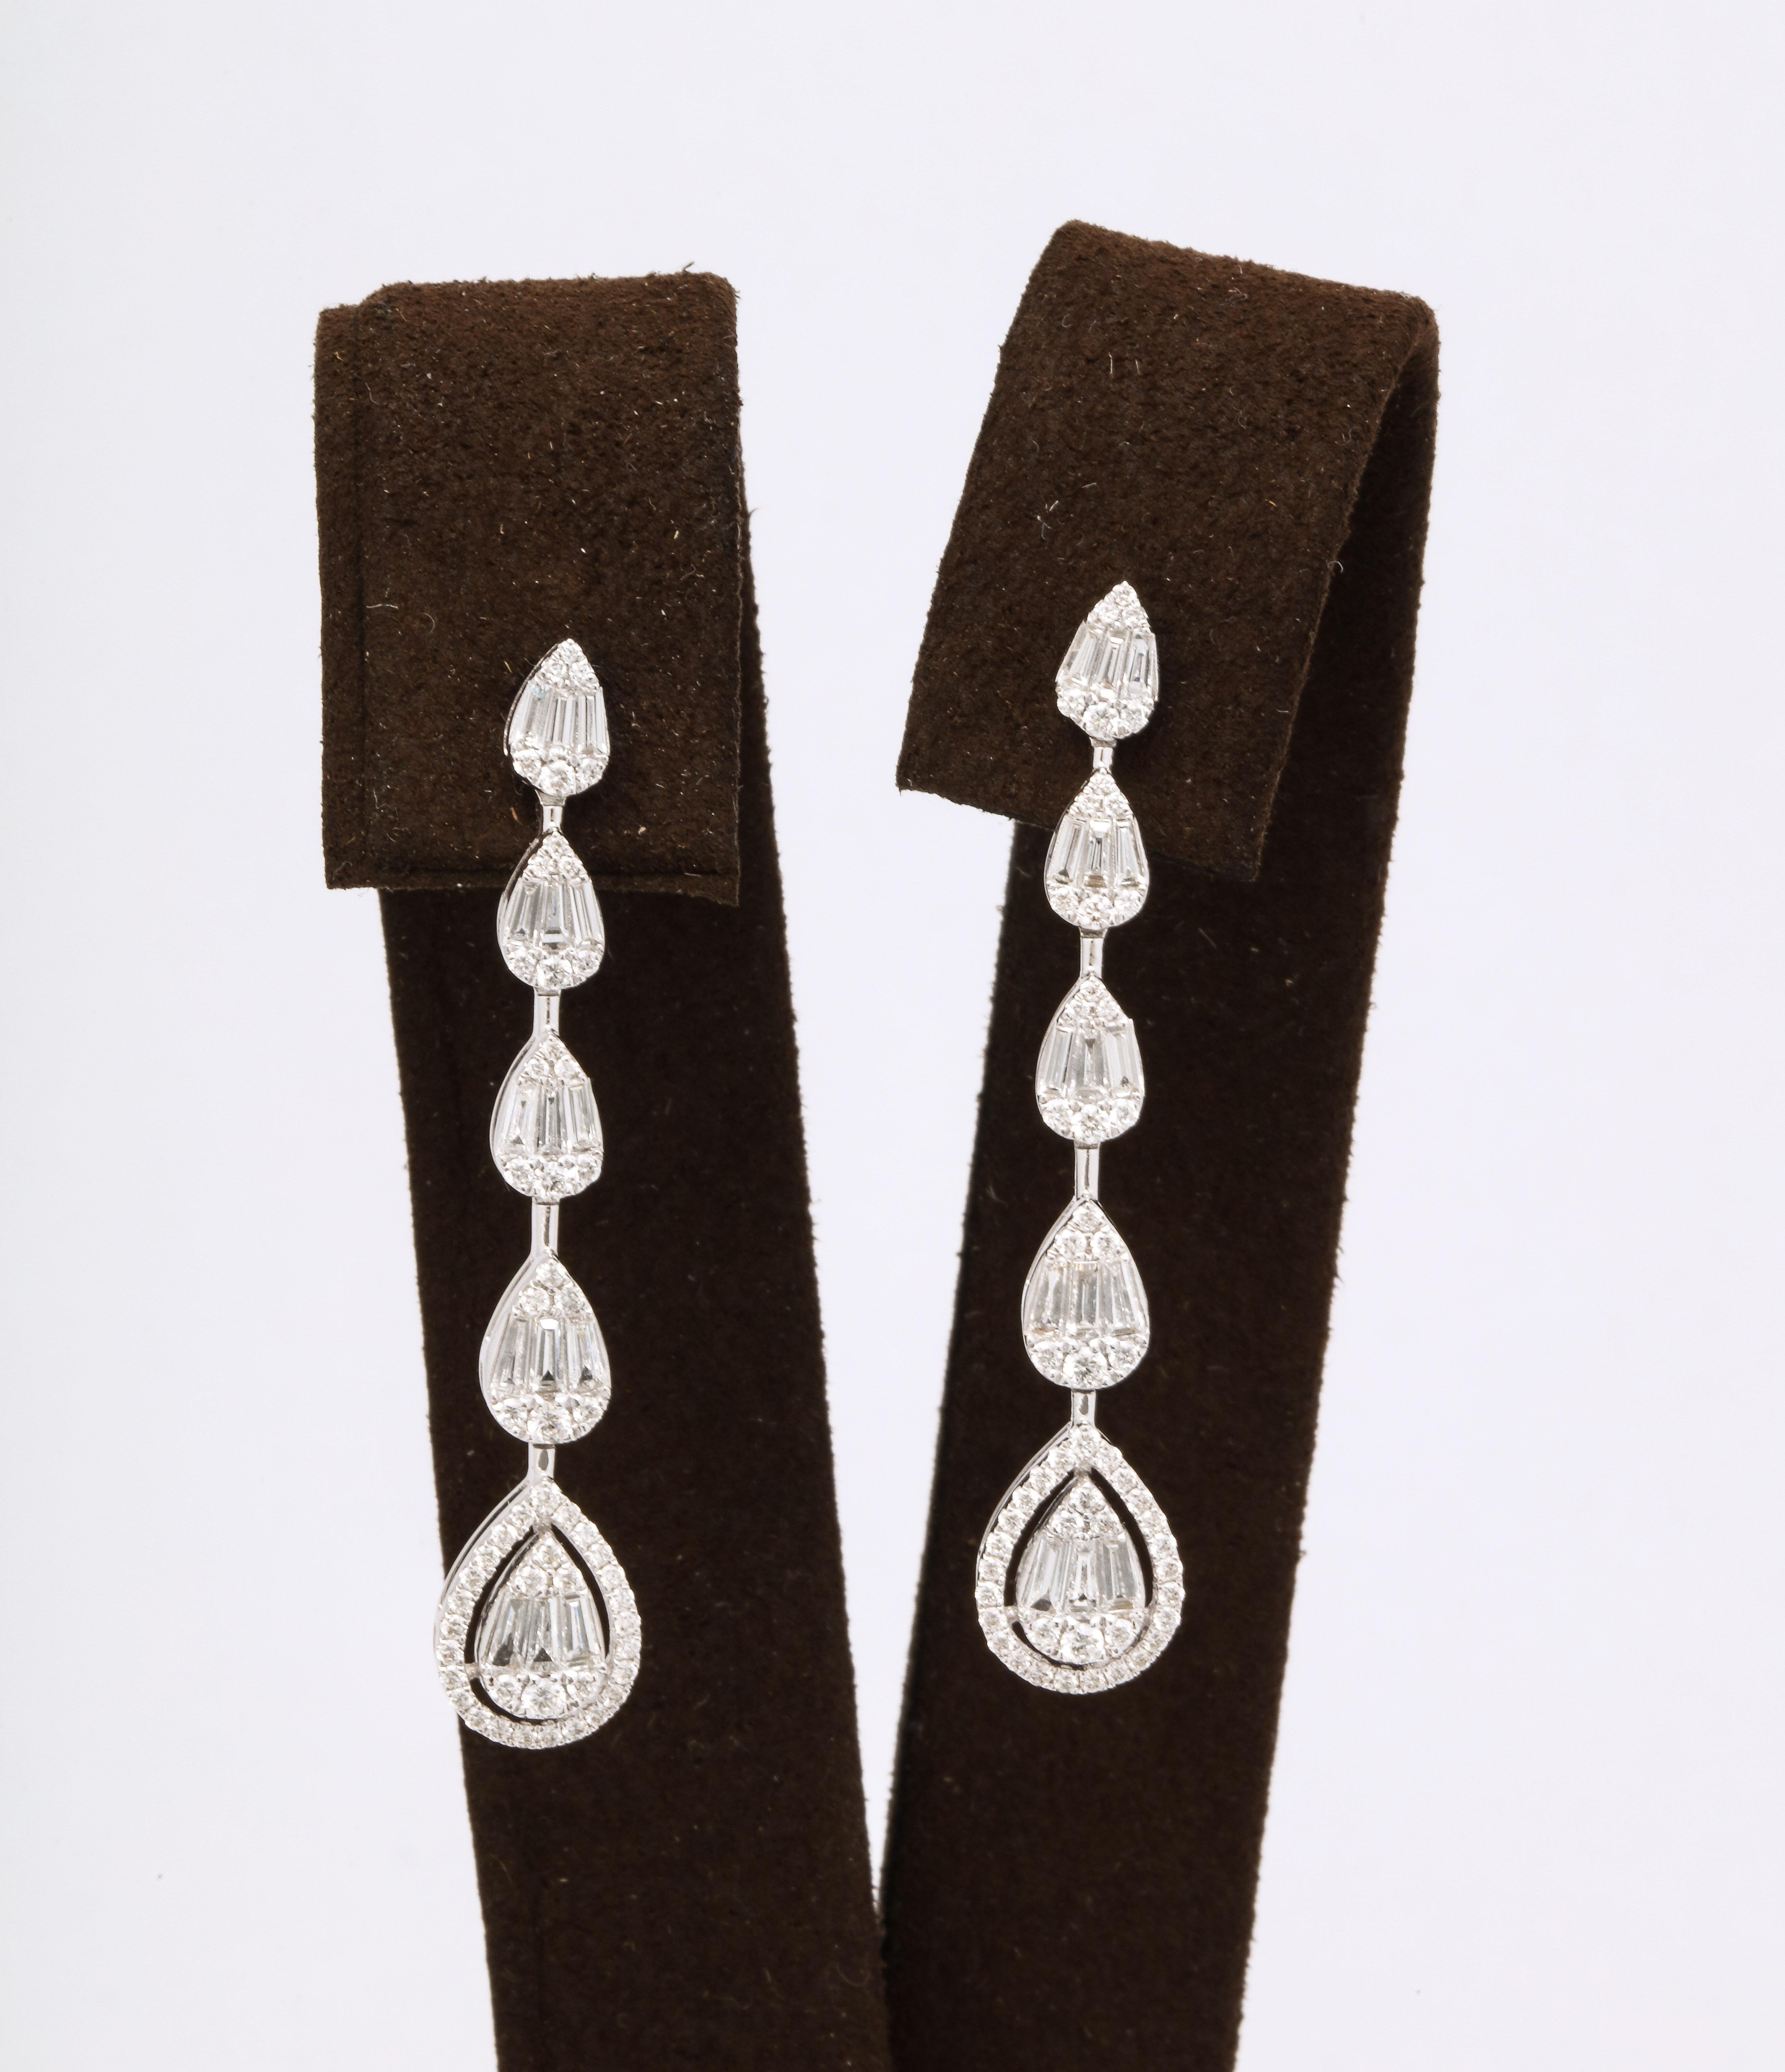 A beautiful dangle earring!

1.44 carats of round brilliant cut and baguette cut diamonds set in 18k white gold. 

Approximately 1.65 inches in length. 